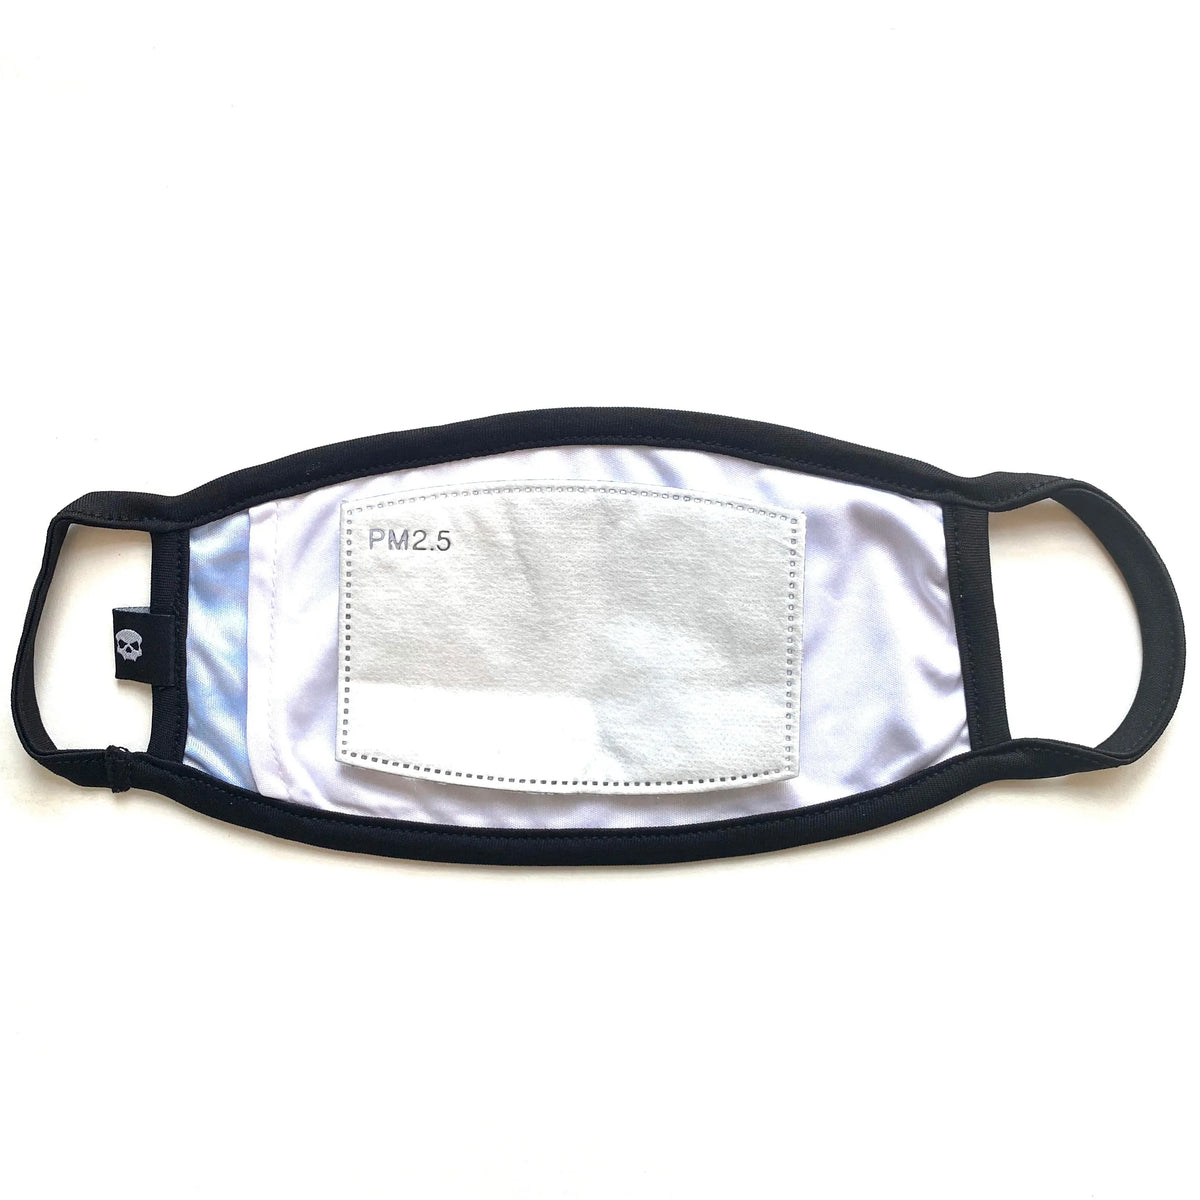 Filter Face Mask T-King (includes 5 PM2.5 filters)